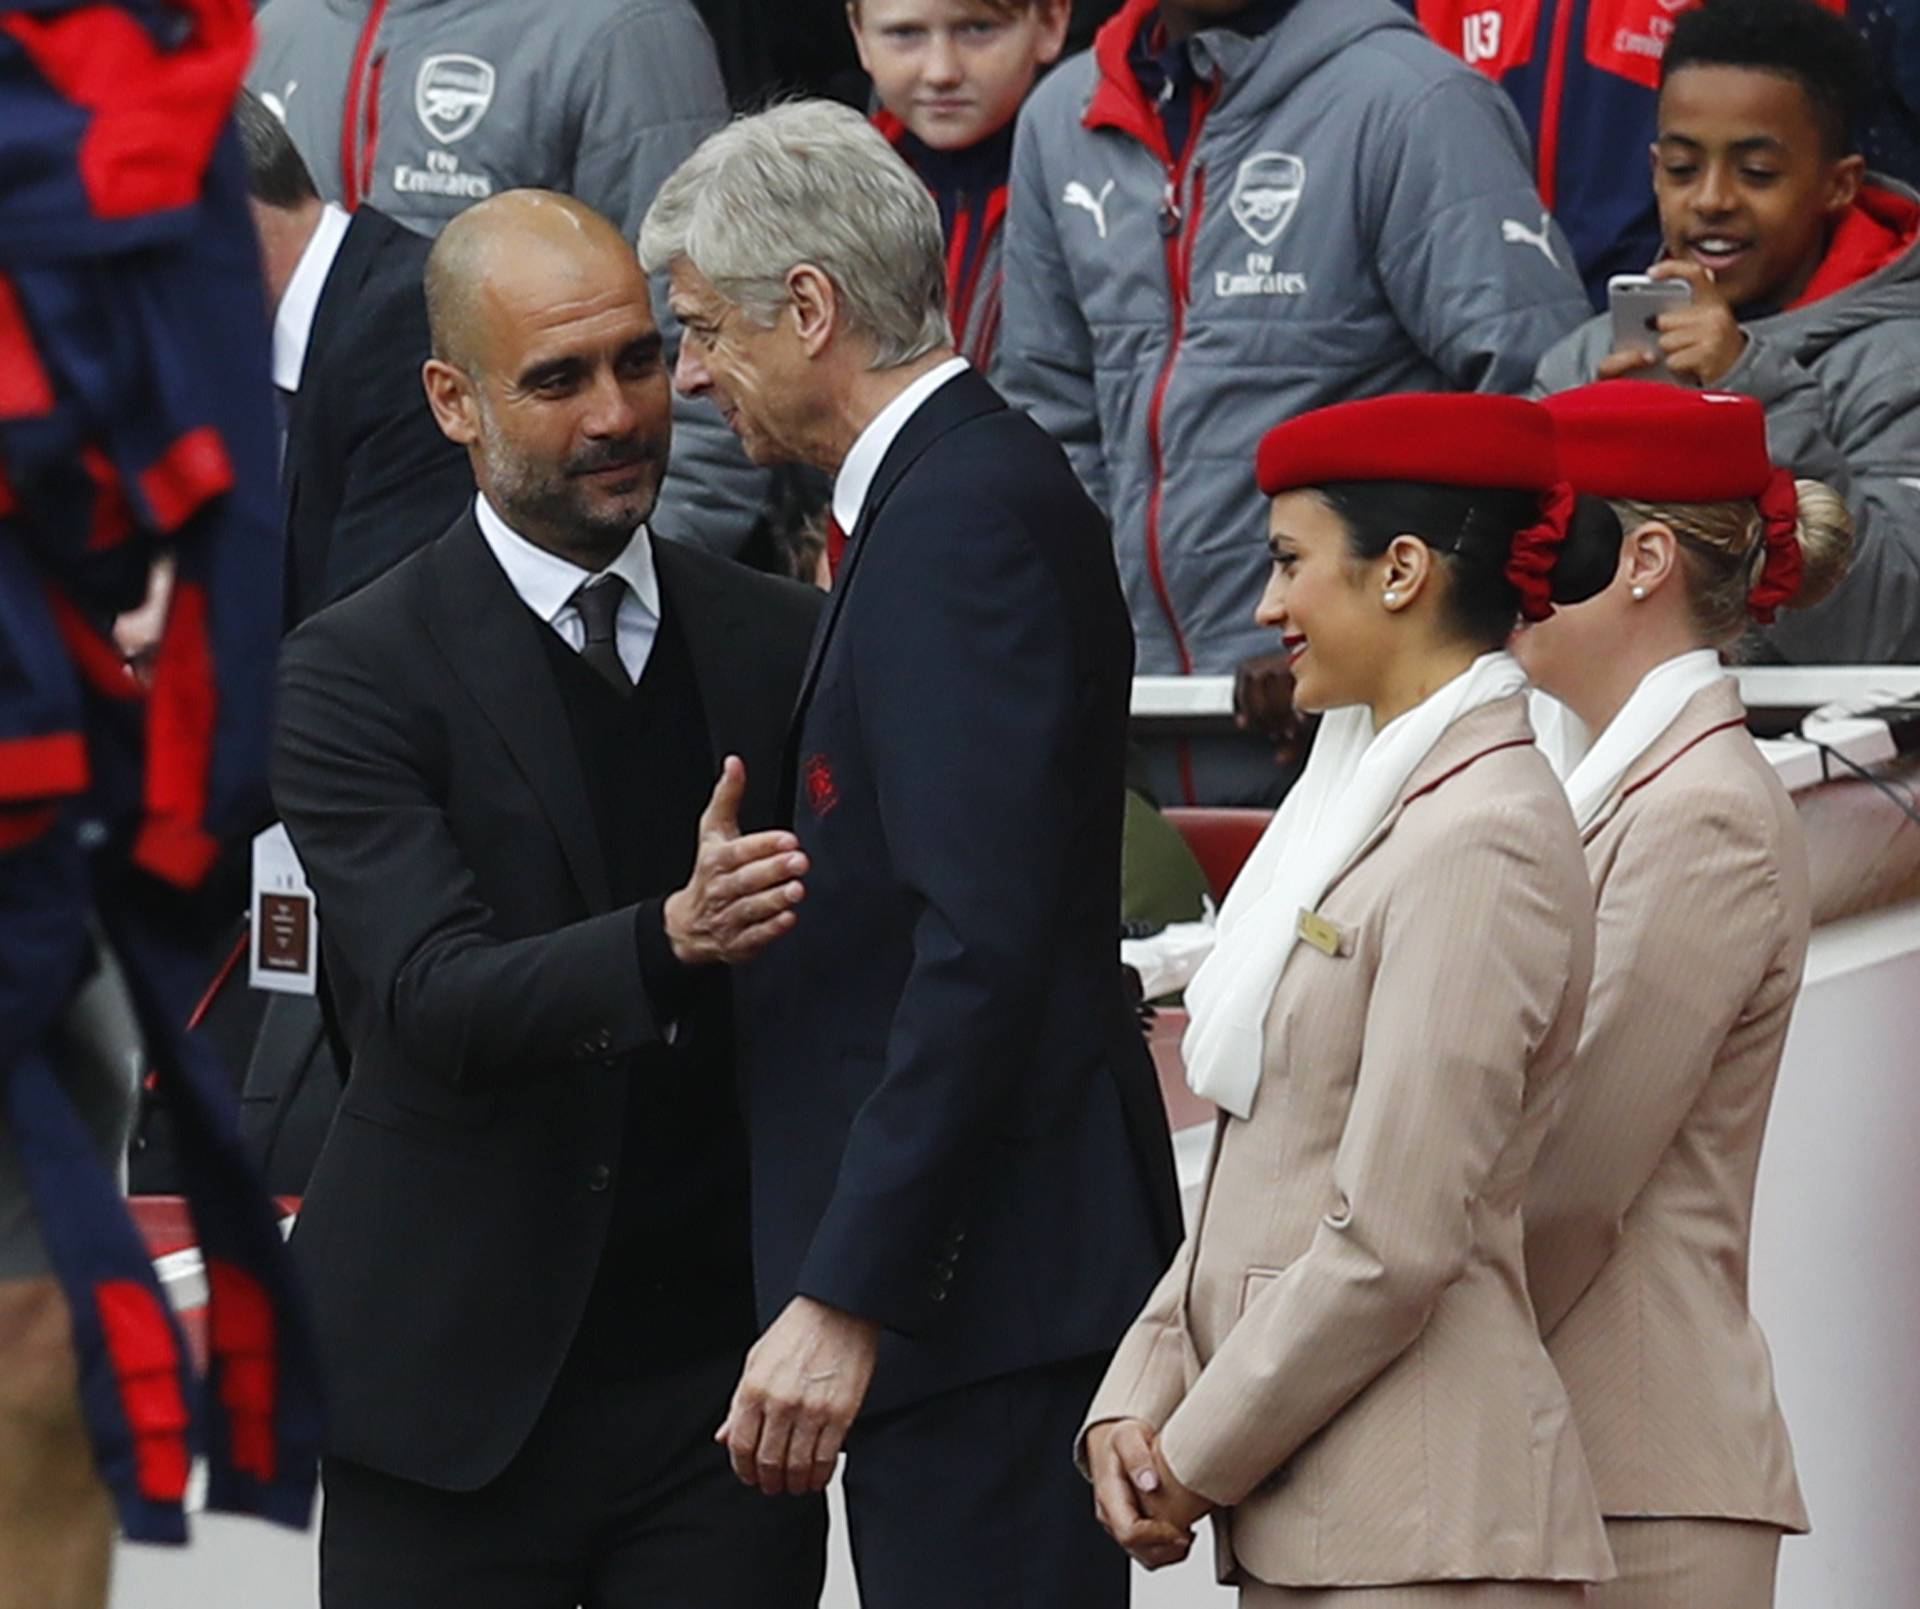 Manchester City manager Pep Guardiola and Arsenal manager Arsene Wenger